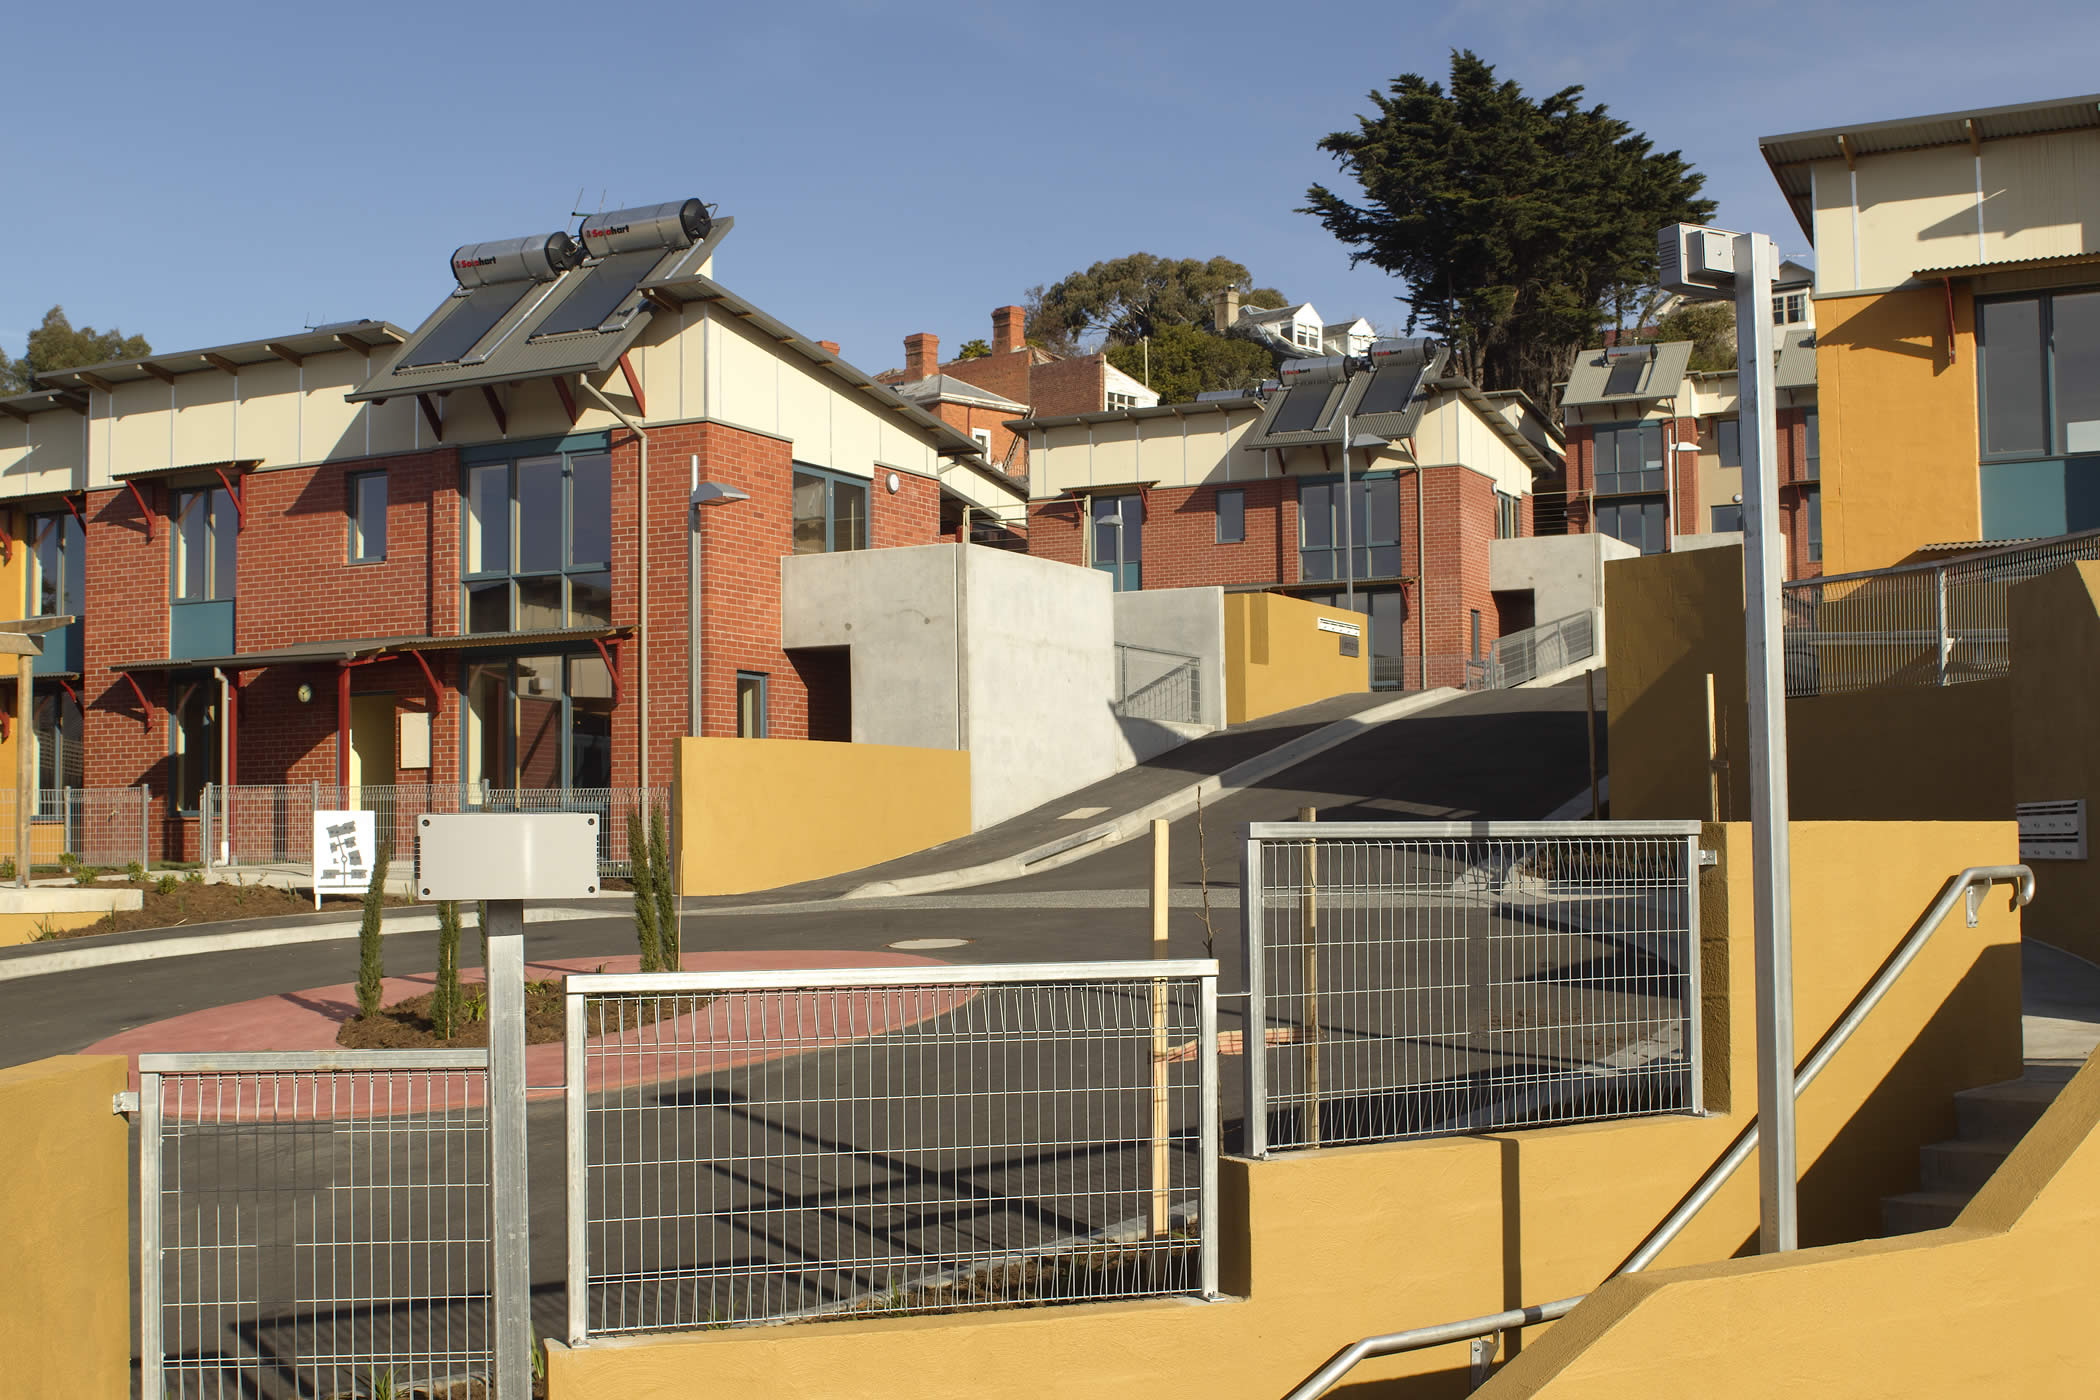 Walford Terraces, Hobart: Generous wall thickness for good insulation, trombe walls and solar roof panels are some of the design devices achieving low energy bills for DHHS tenants in this popular social housing project. Photo by Peter Whyte.